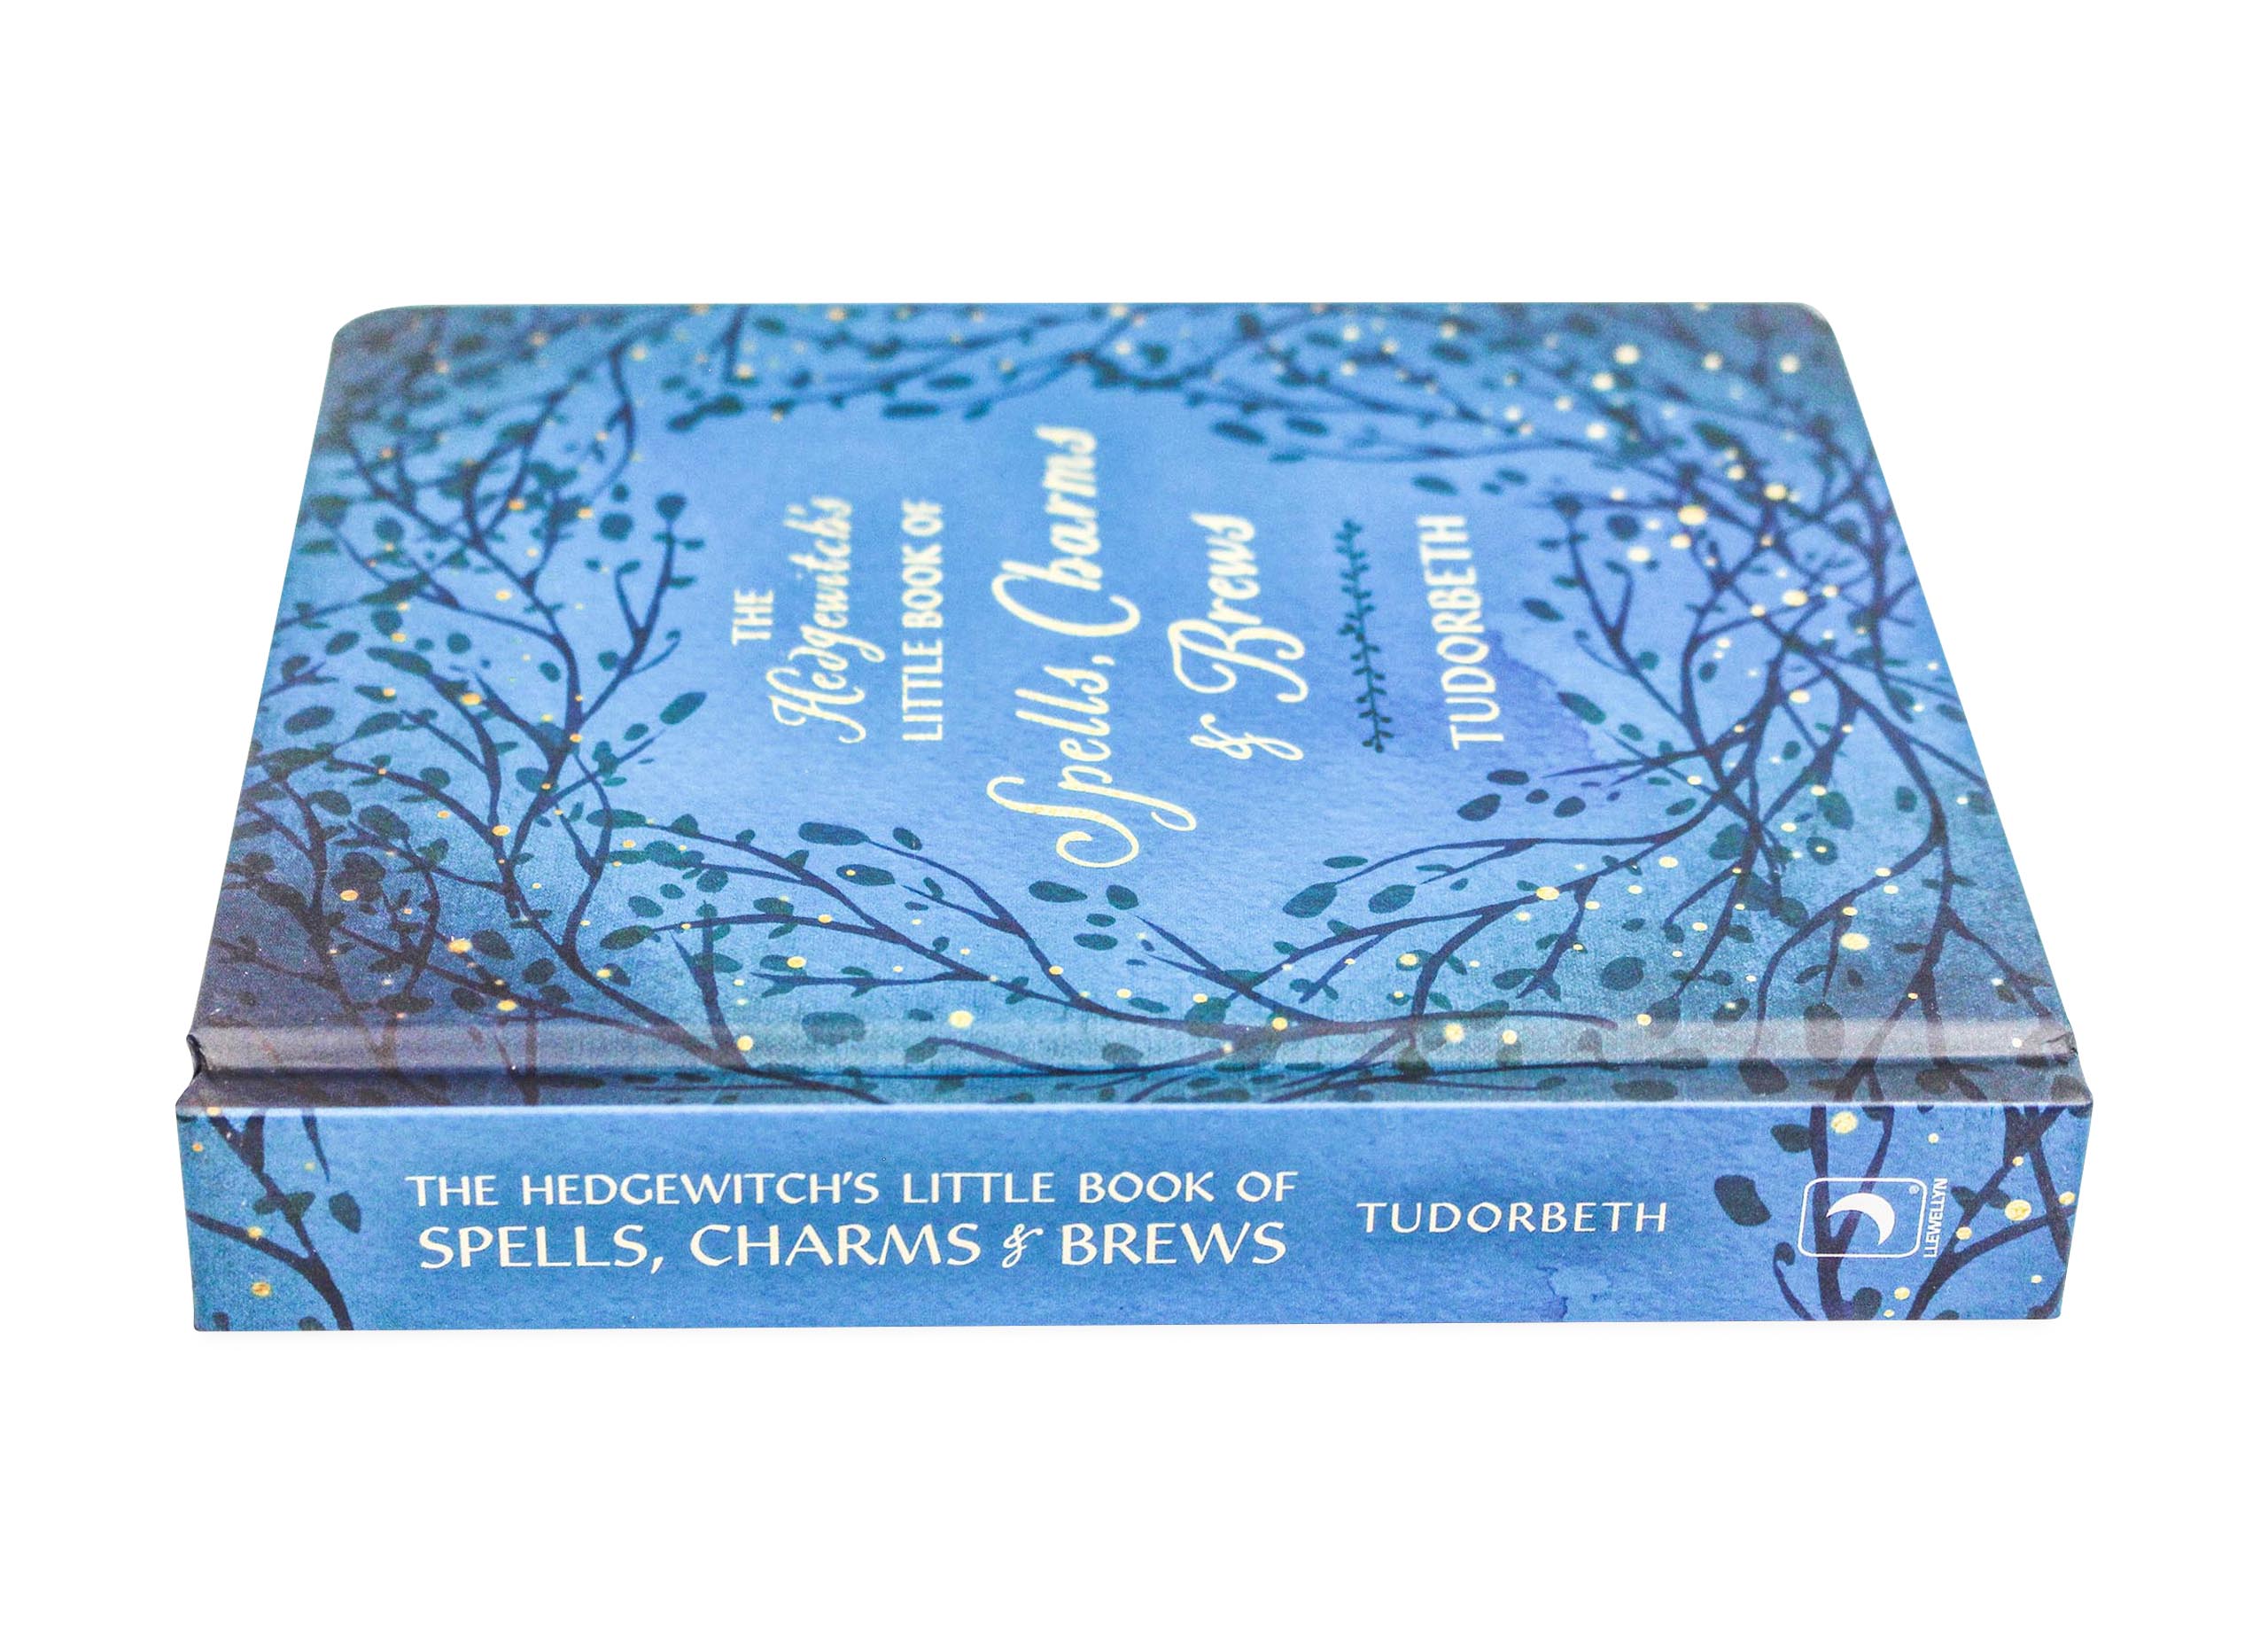 The Hedgewitch's Little Book of Spells, Charms & Brews - Crystal Dreams